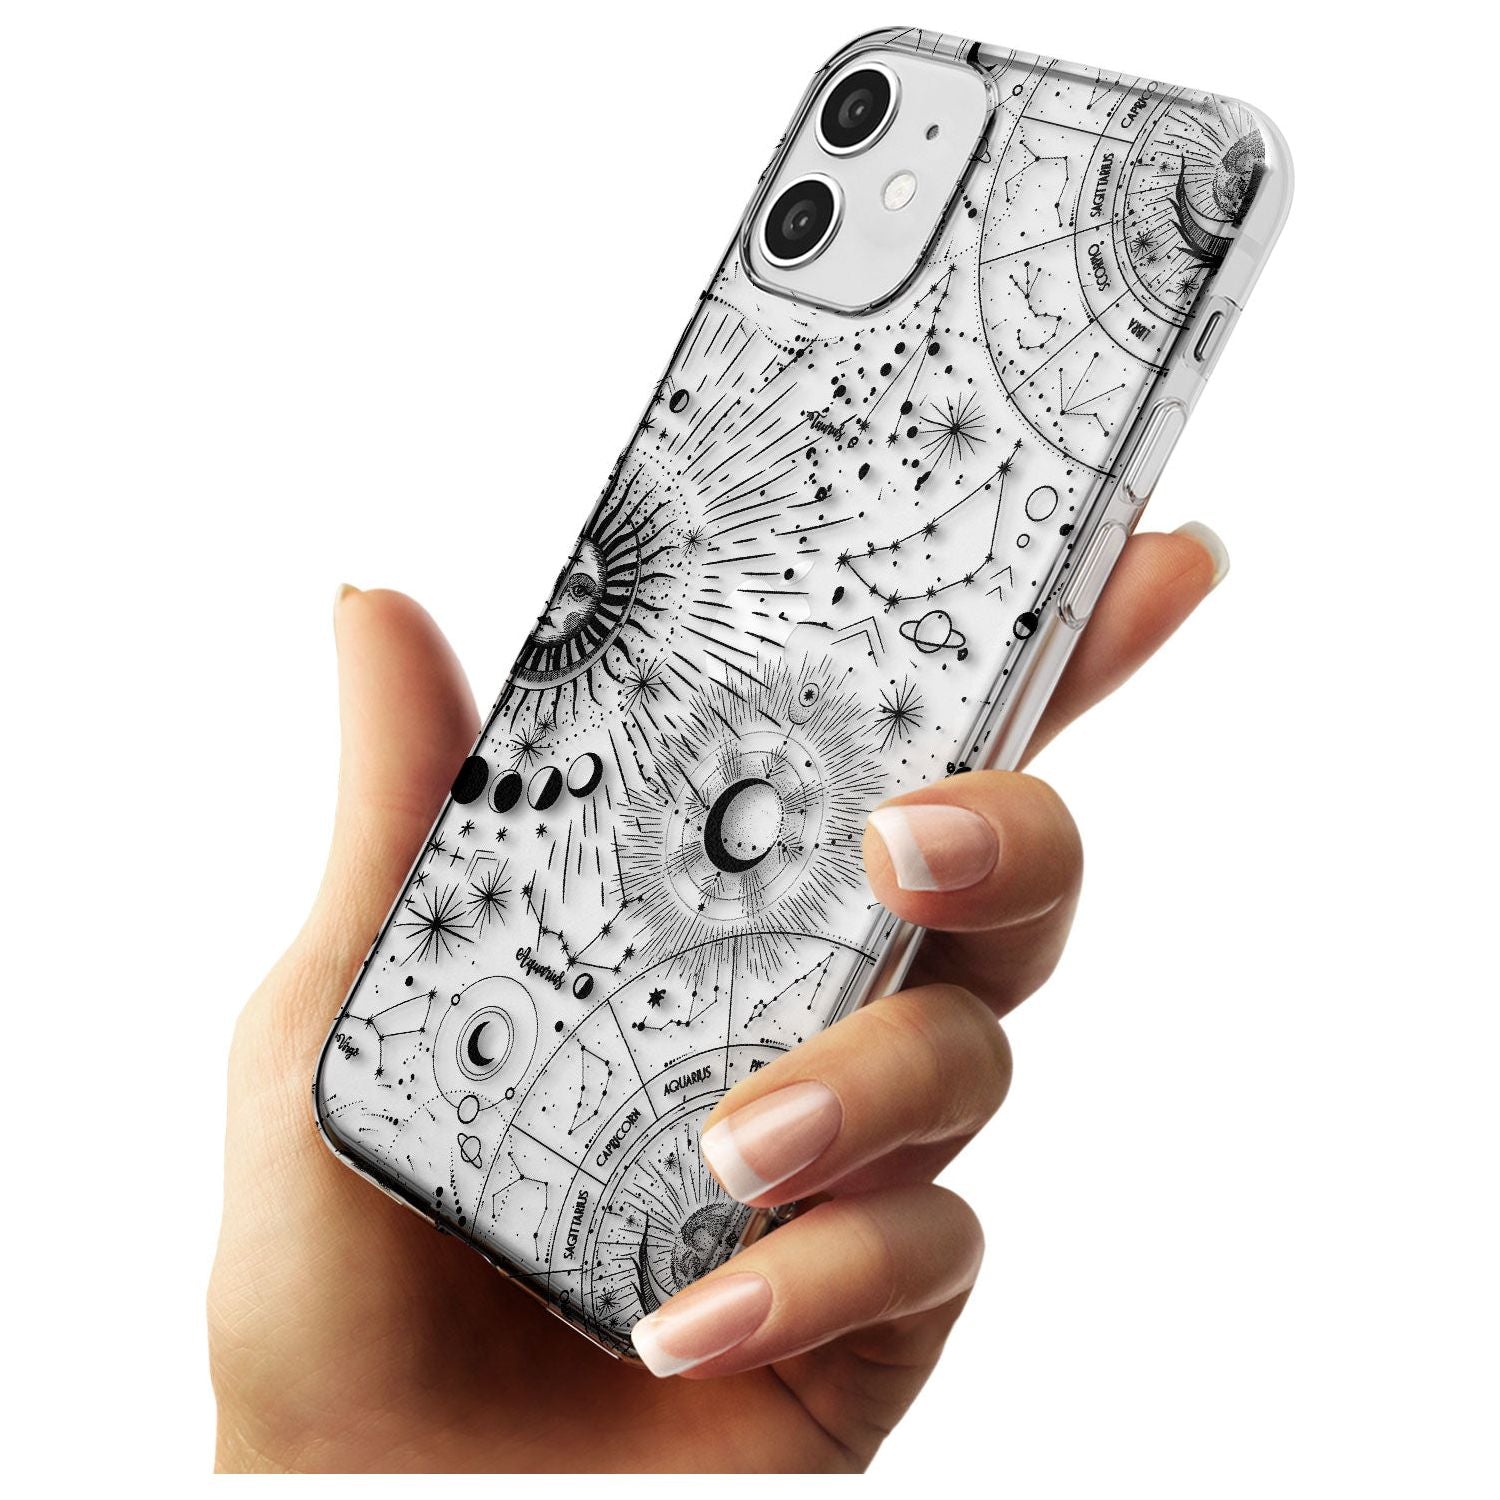 Suns & Constellations Astrological Slim TPU Phone Case for iPhone 11